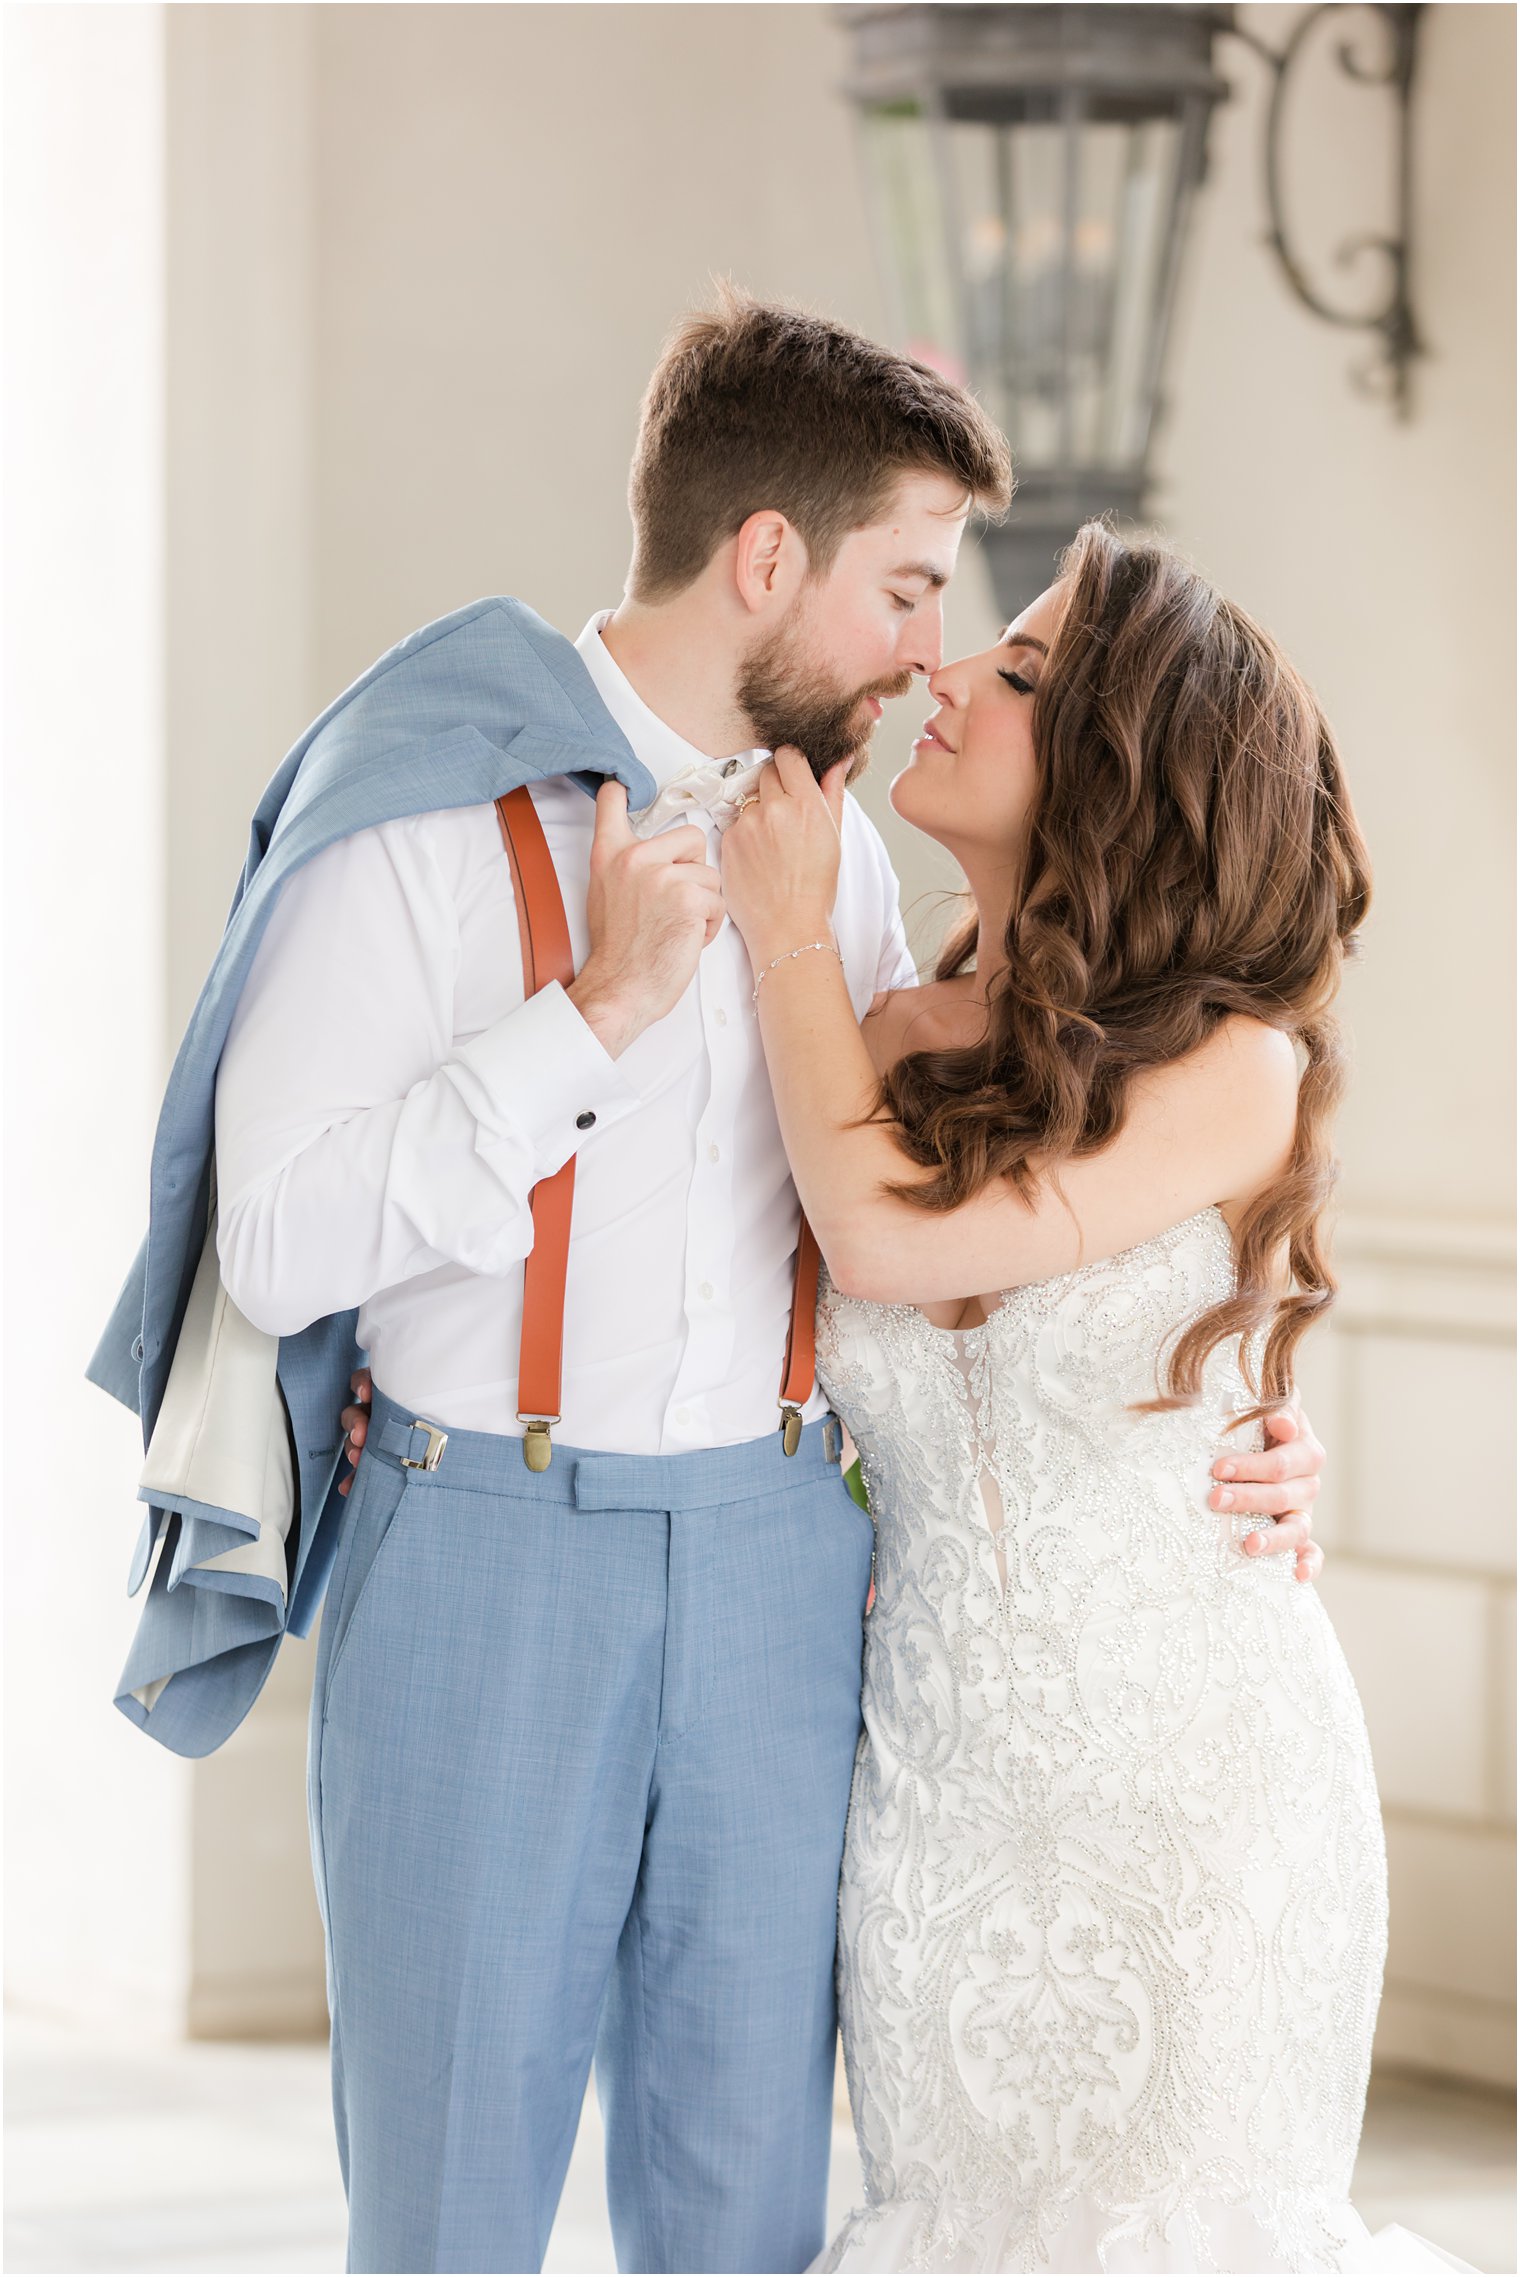 bride lenas to kiss groom holding his chin during NJ wedding day 